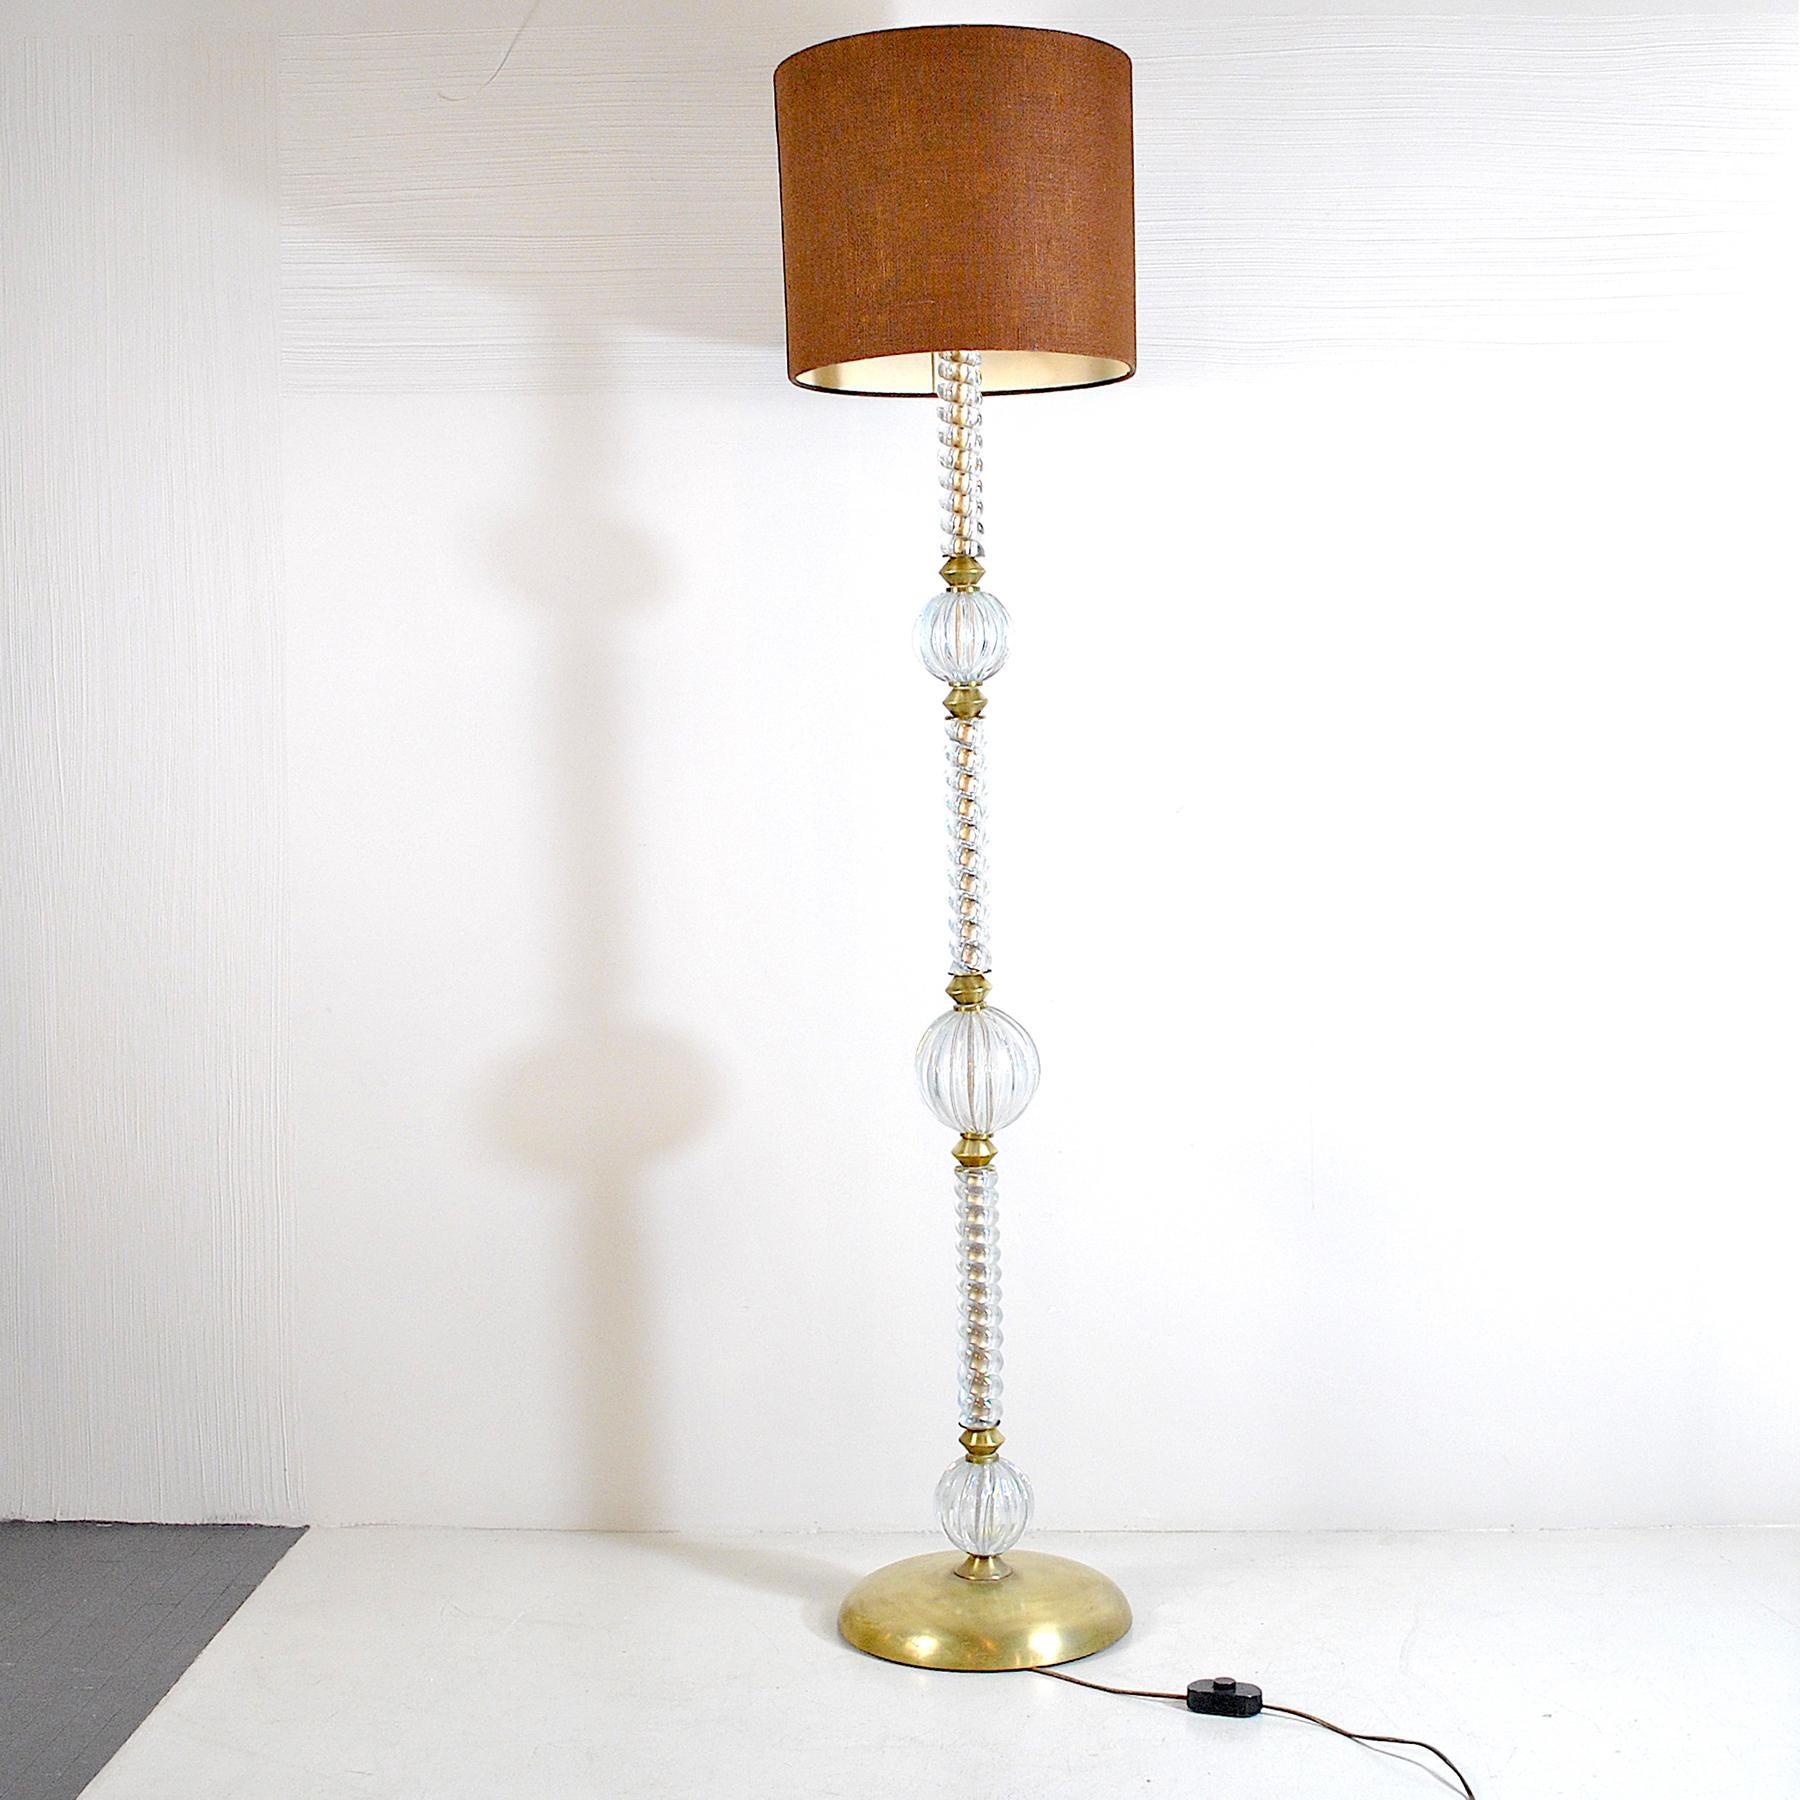 Italian Midcentury Floor Lamp by Barovier & Toso For Sale 4